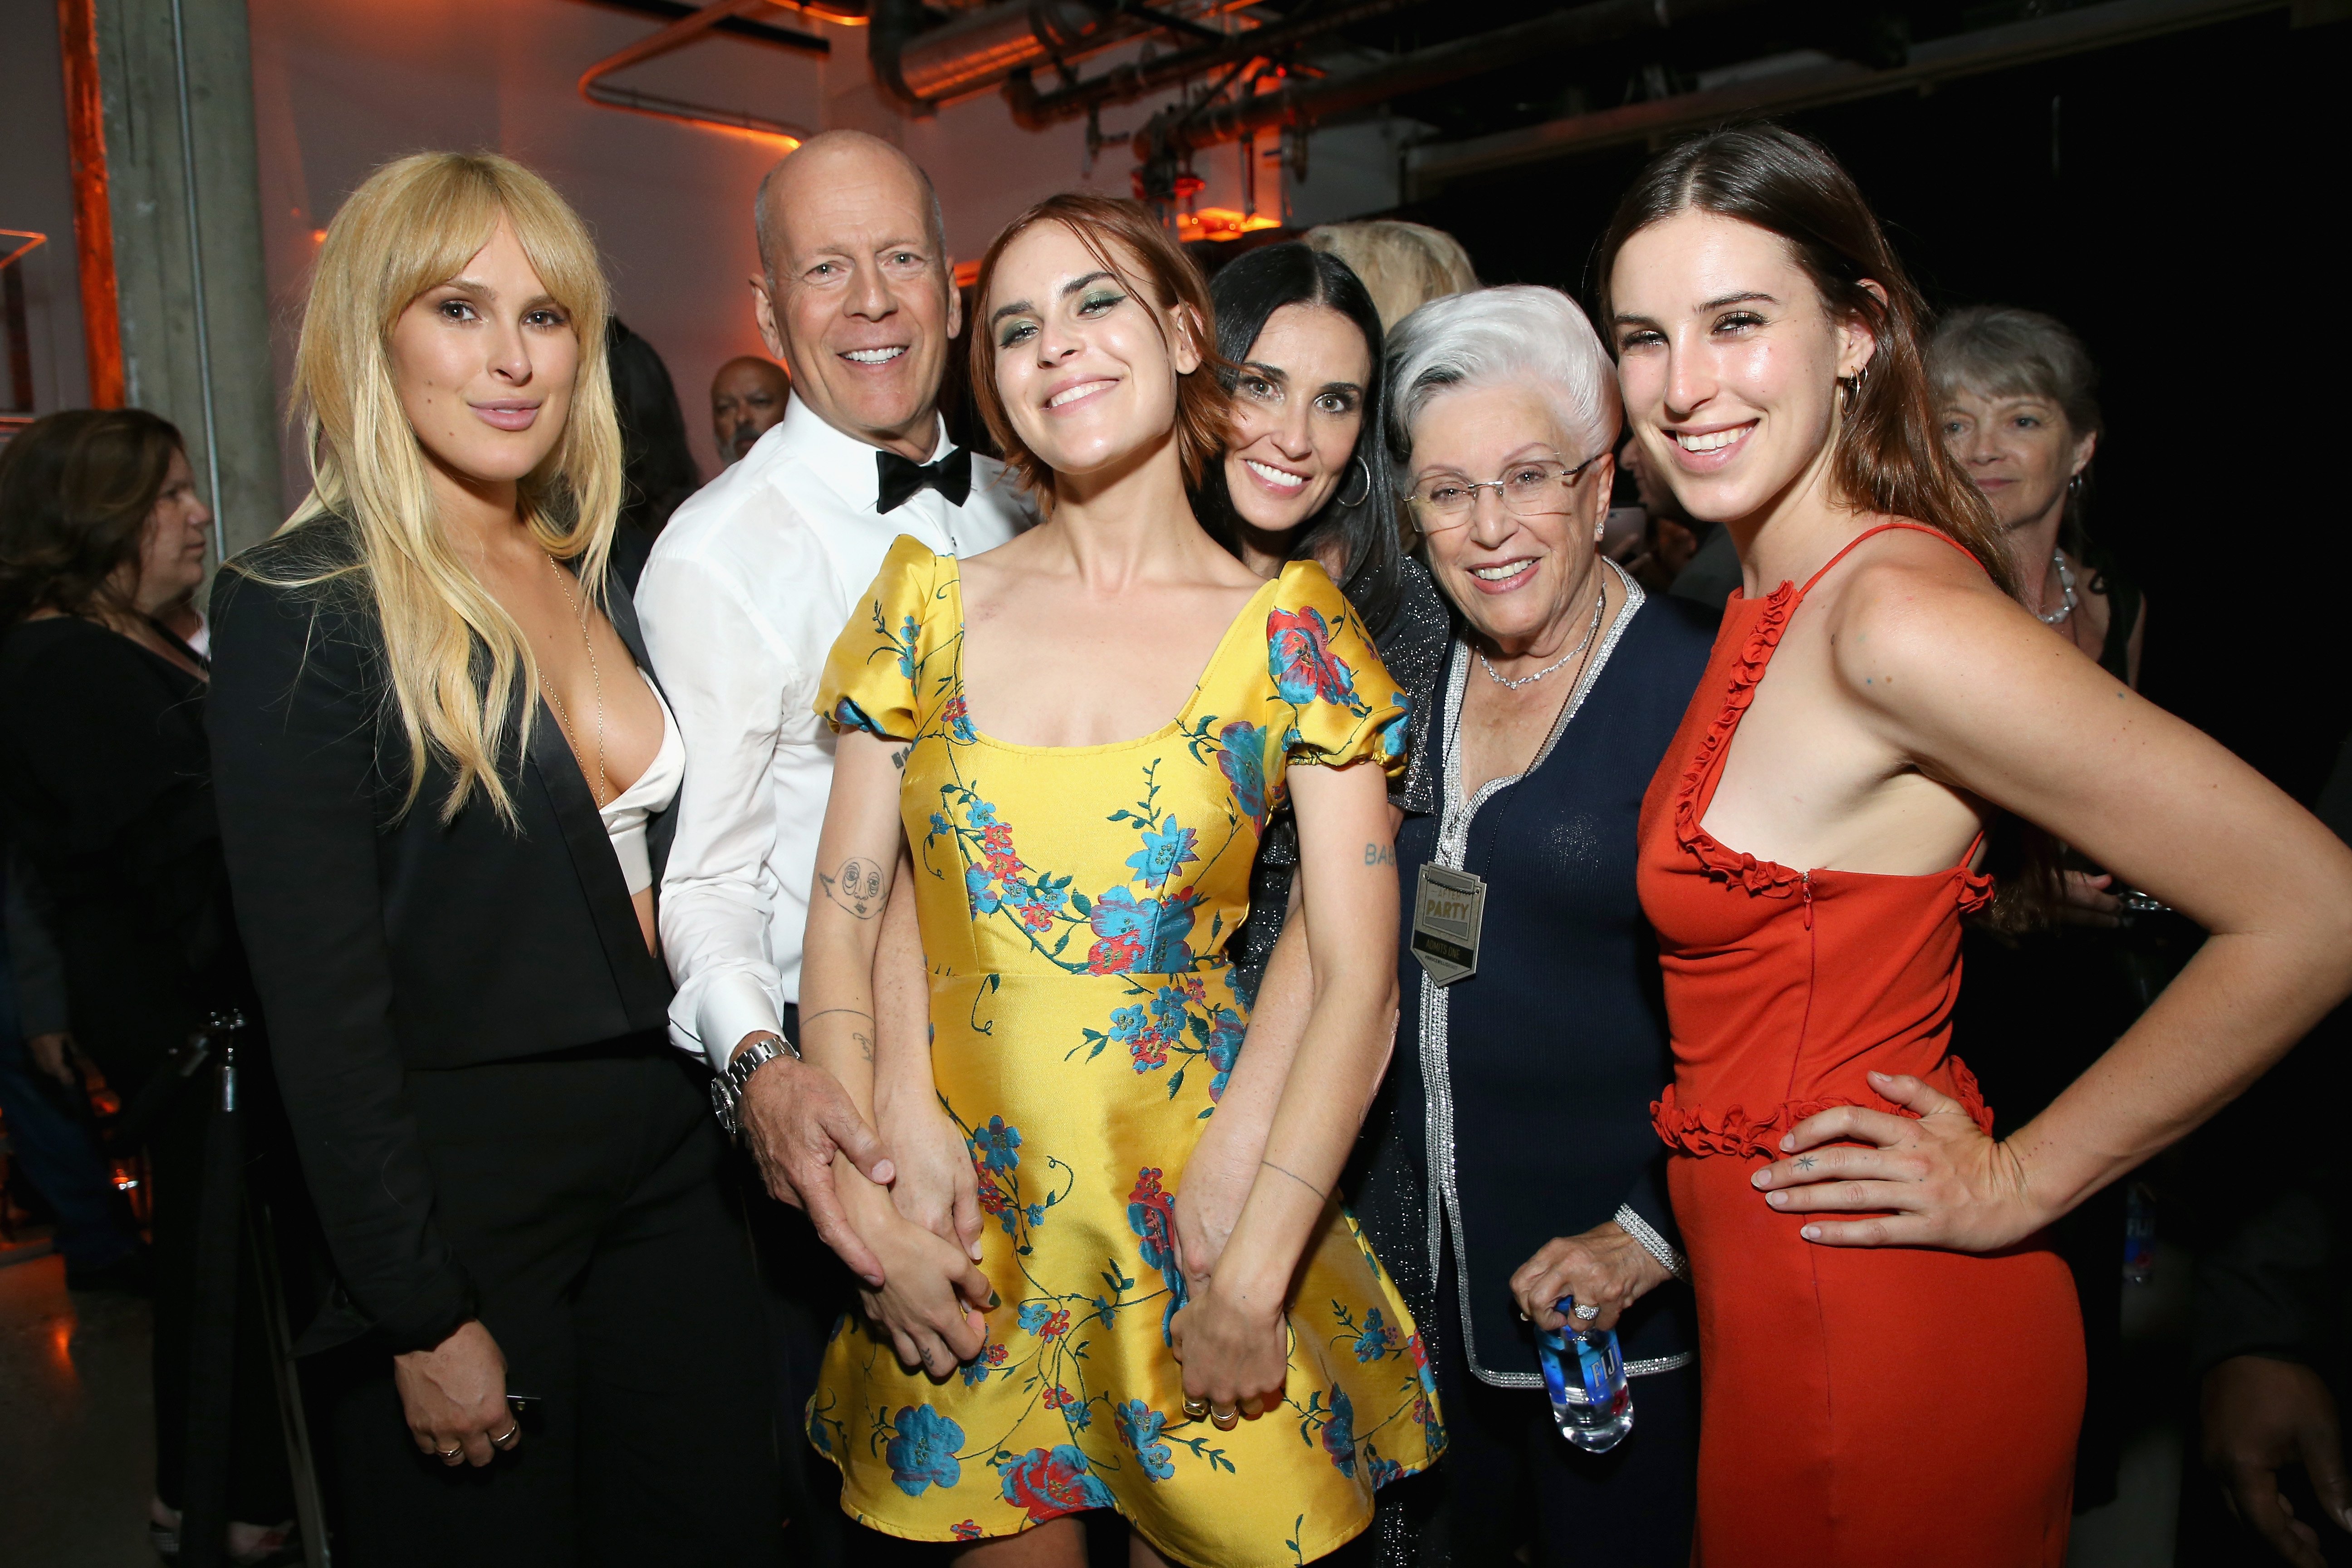 Rumer Willis, Bruce Willis, Tallulah Belle Willis, Demi Moore, Marlene Willis and Scout Willis attending the after party for the Comedy Central Roast of Bruce Willis at NeueHouse on July 14, 2018 in Los Angeles, California. | Source: Getty Images